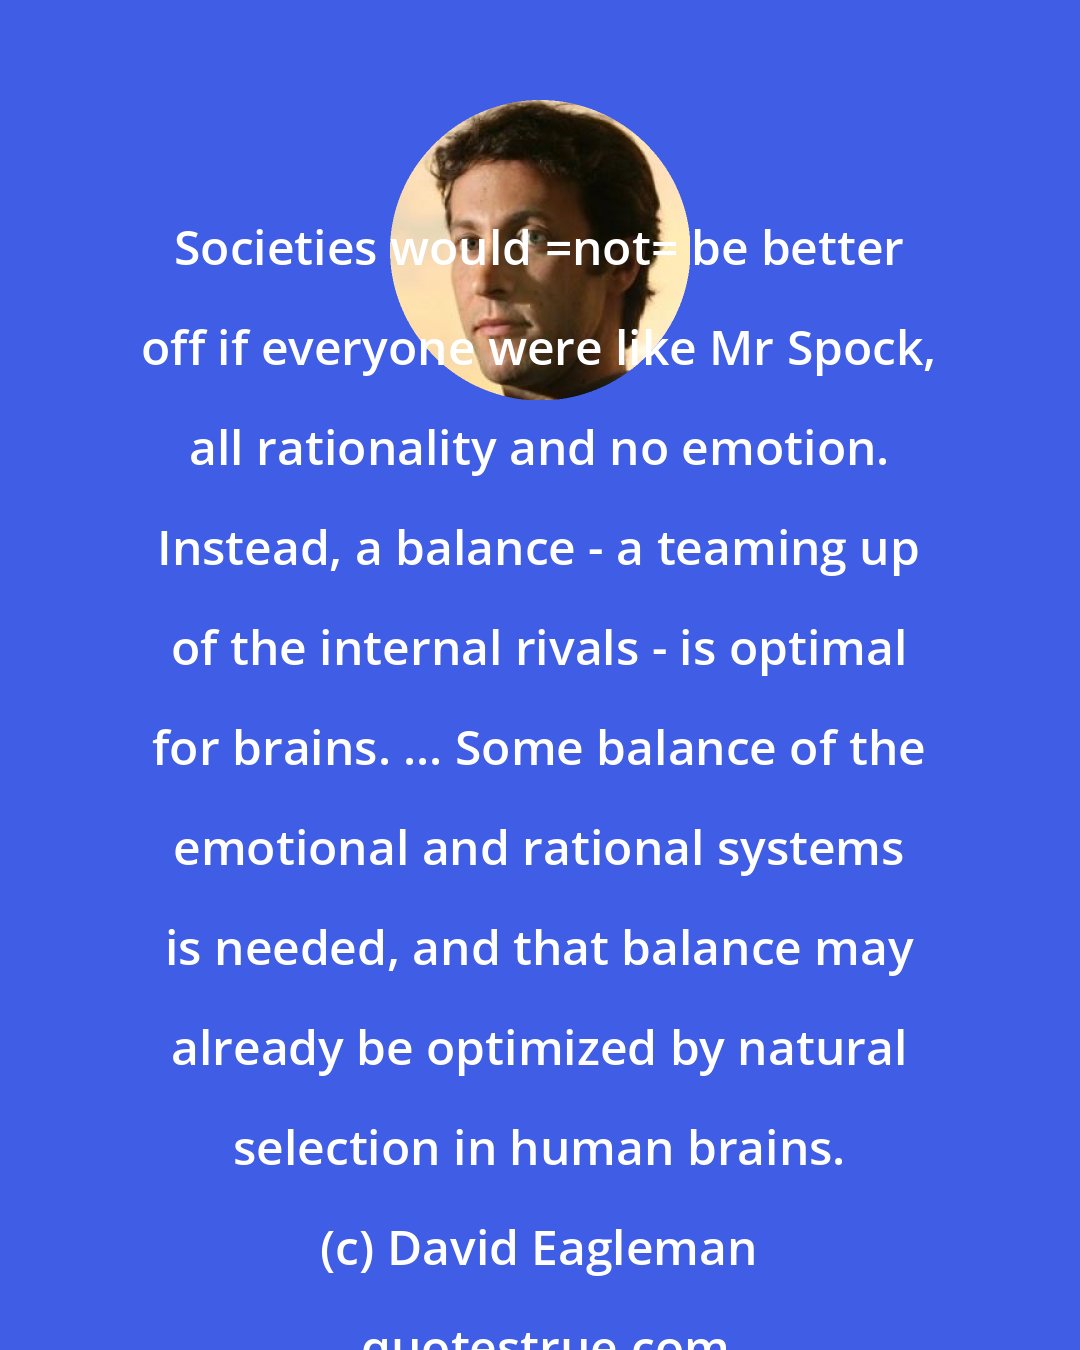 David Eagleman: Societies would _not_ be better off if everyone were like Mr Spock, all rationality and no emotion. Instead, a balance - a teaming up of the internal rivals - is optimal for brains. ... Some balance of the emotional and rational systems is needed, and that balance may already be optimized by natural selection in human brains.